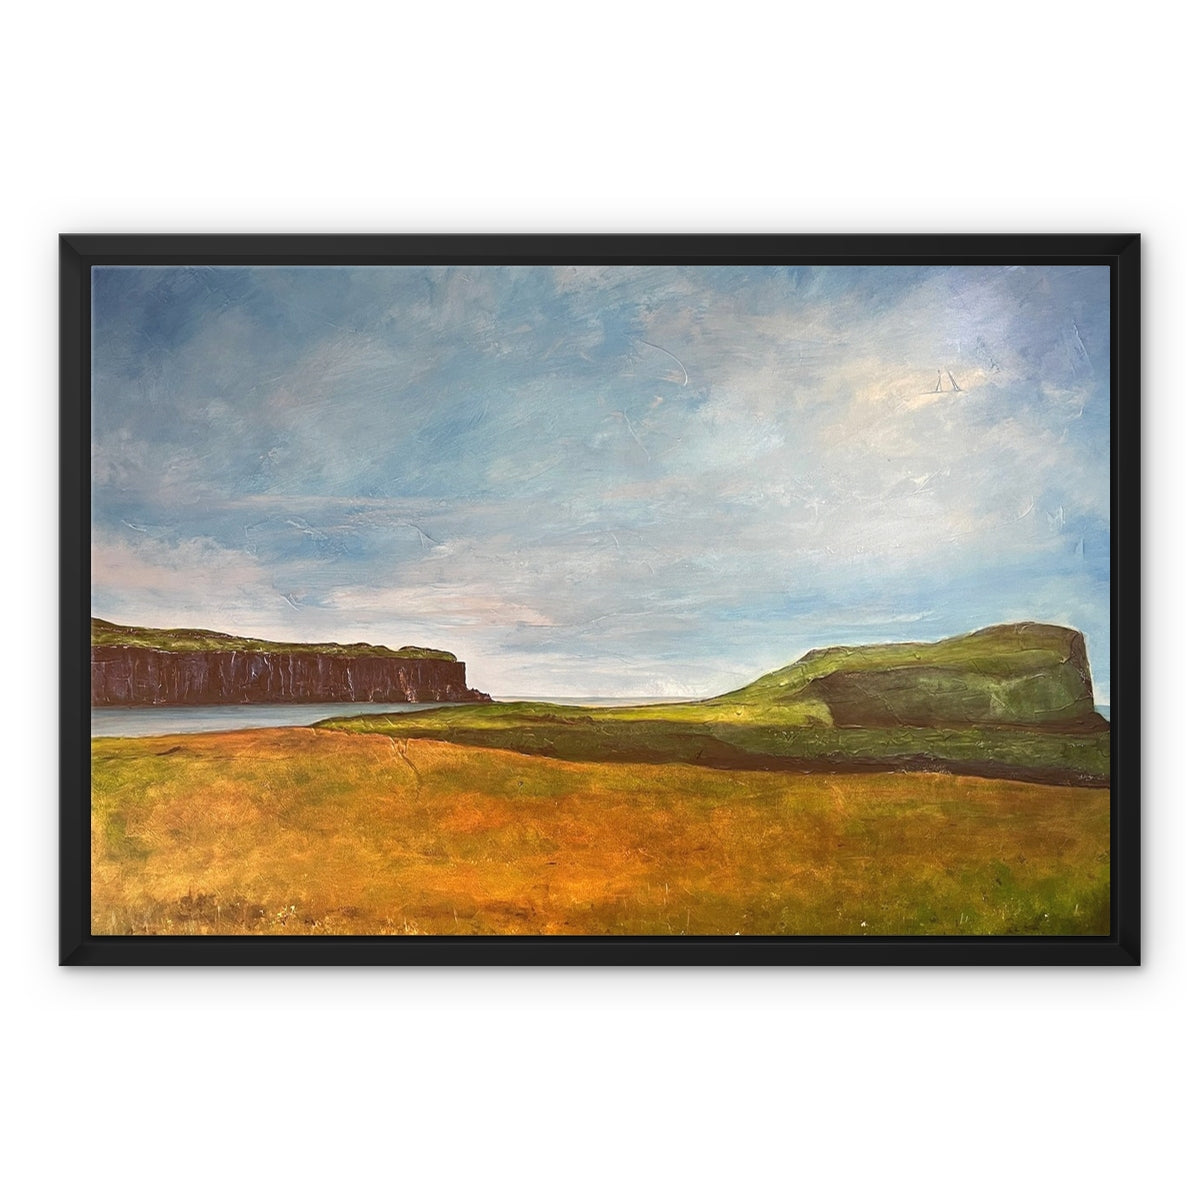 Approaching Oronsay Skye Painting | Framed Canvas